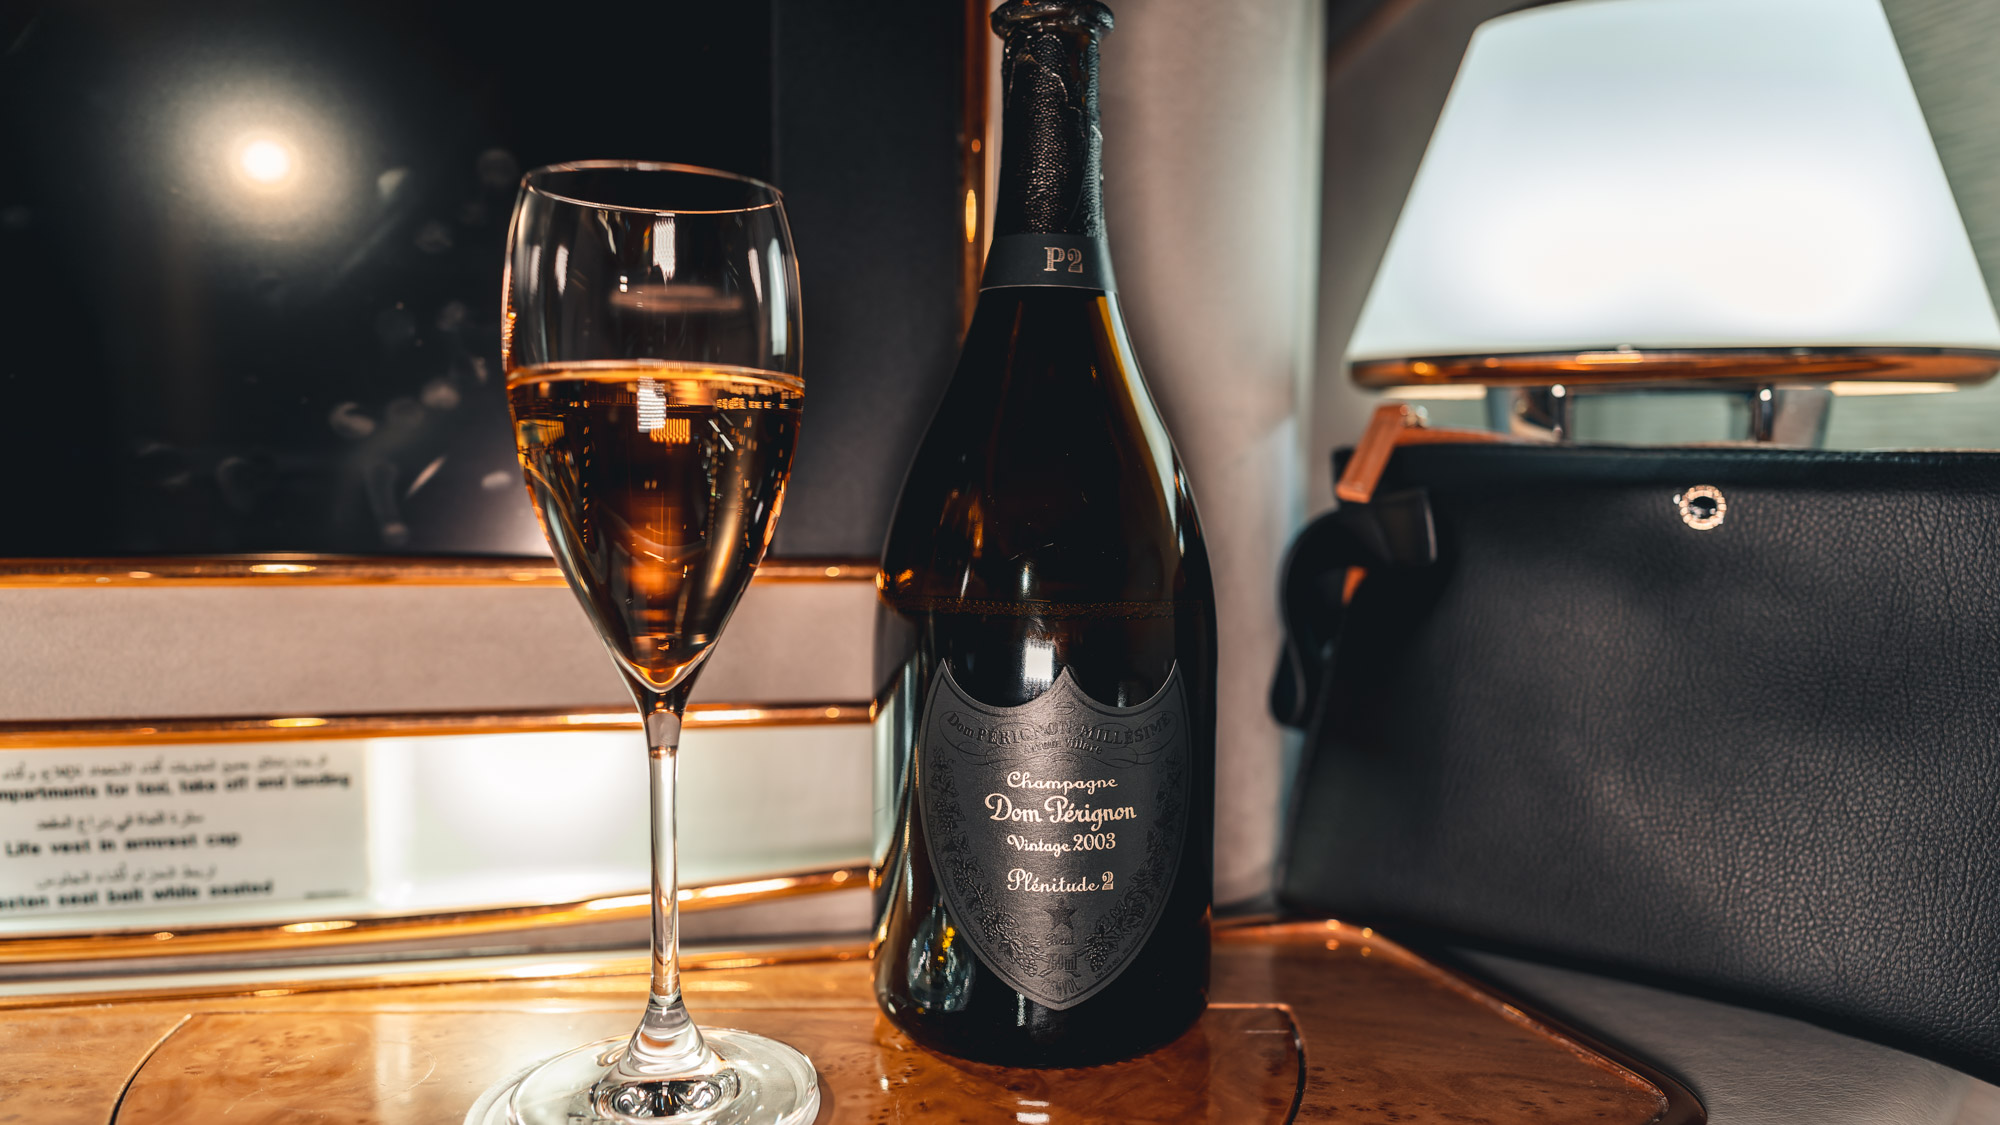 Emirates Boeing 777 First class Champagne and bottle